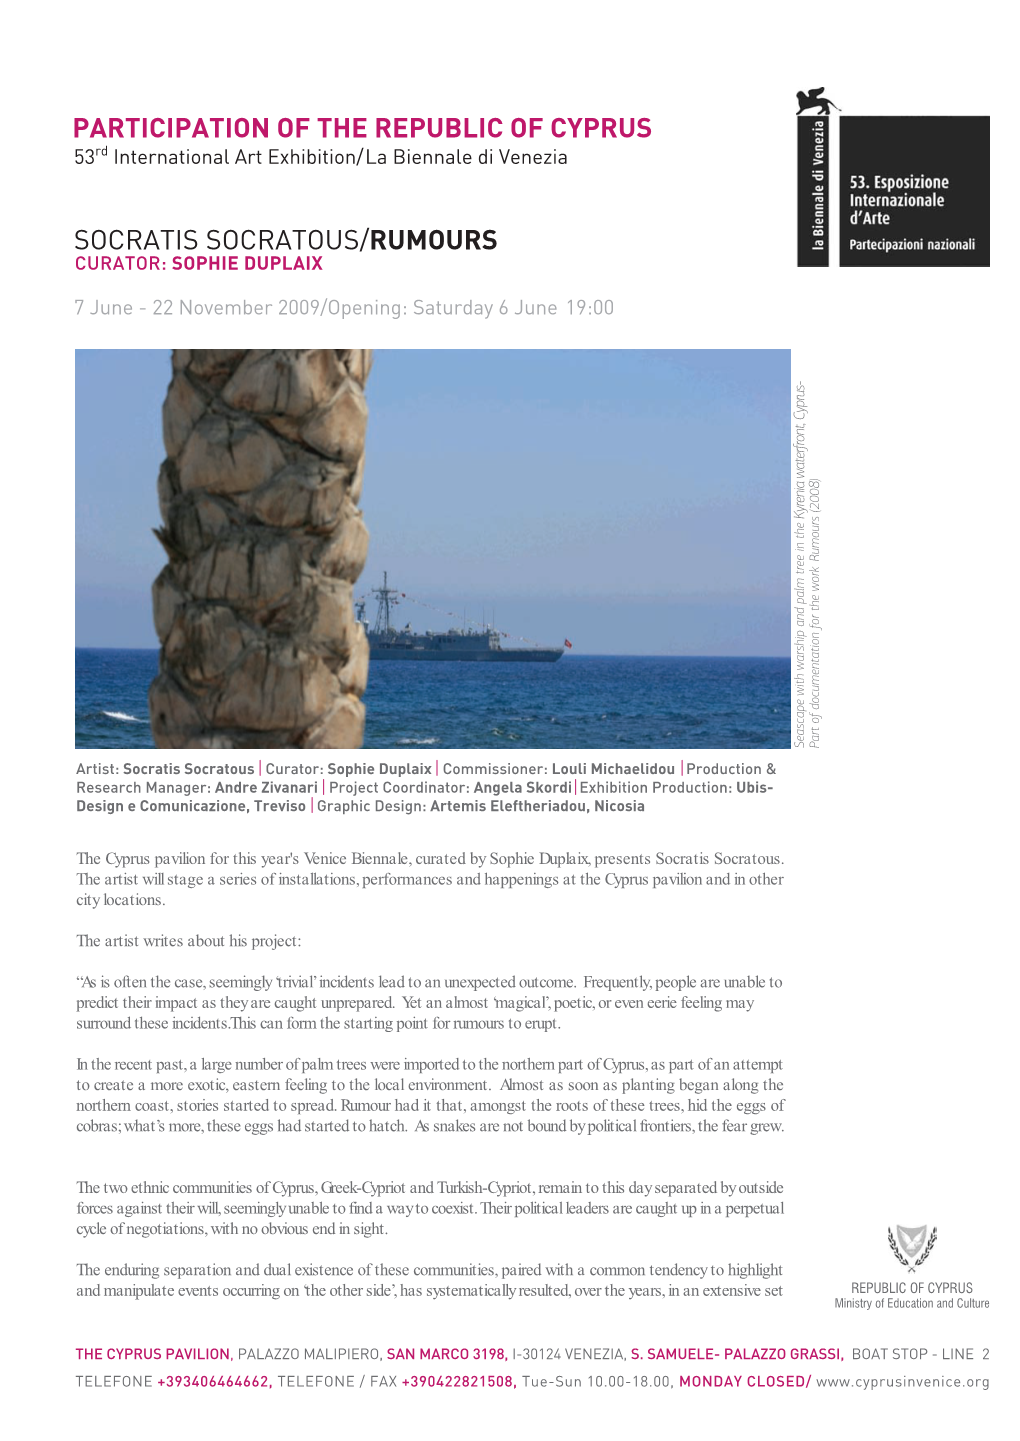 The Cyprus Pavilion for This Year's Venice Biennale, Curated by Sophie Duplaix, Presents Socratis Socratous